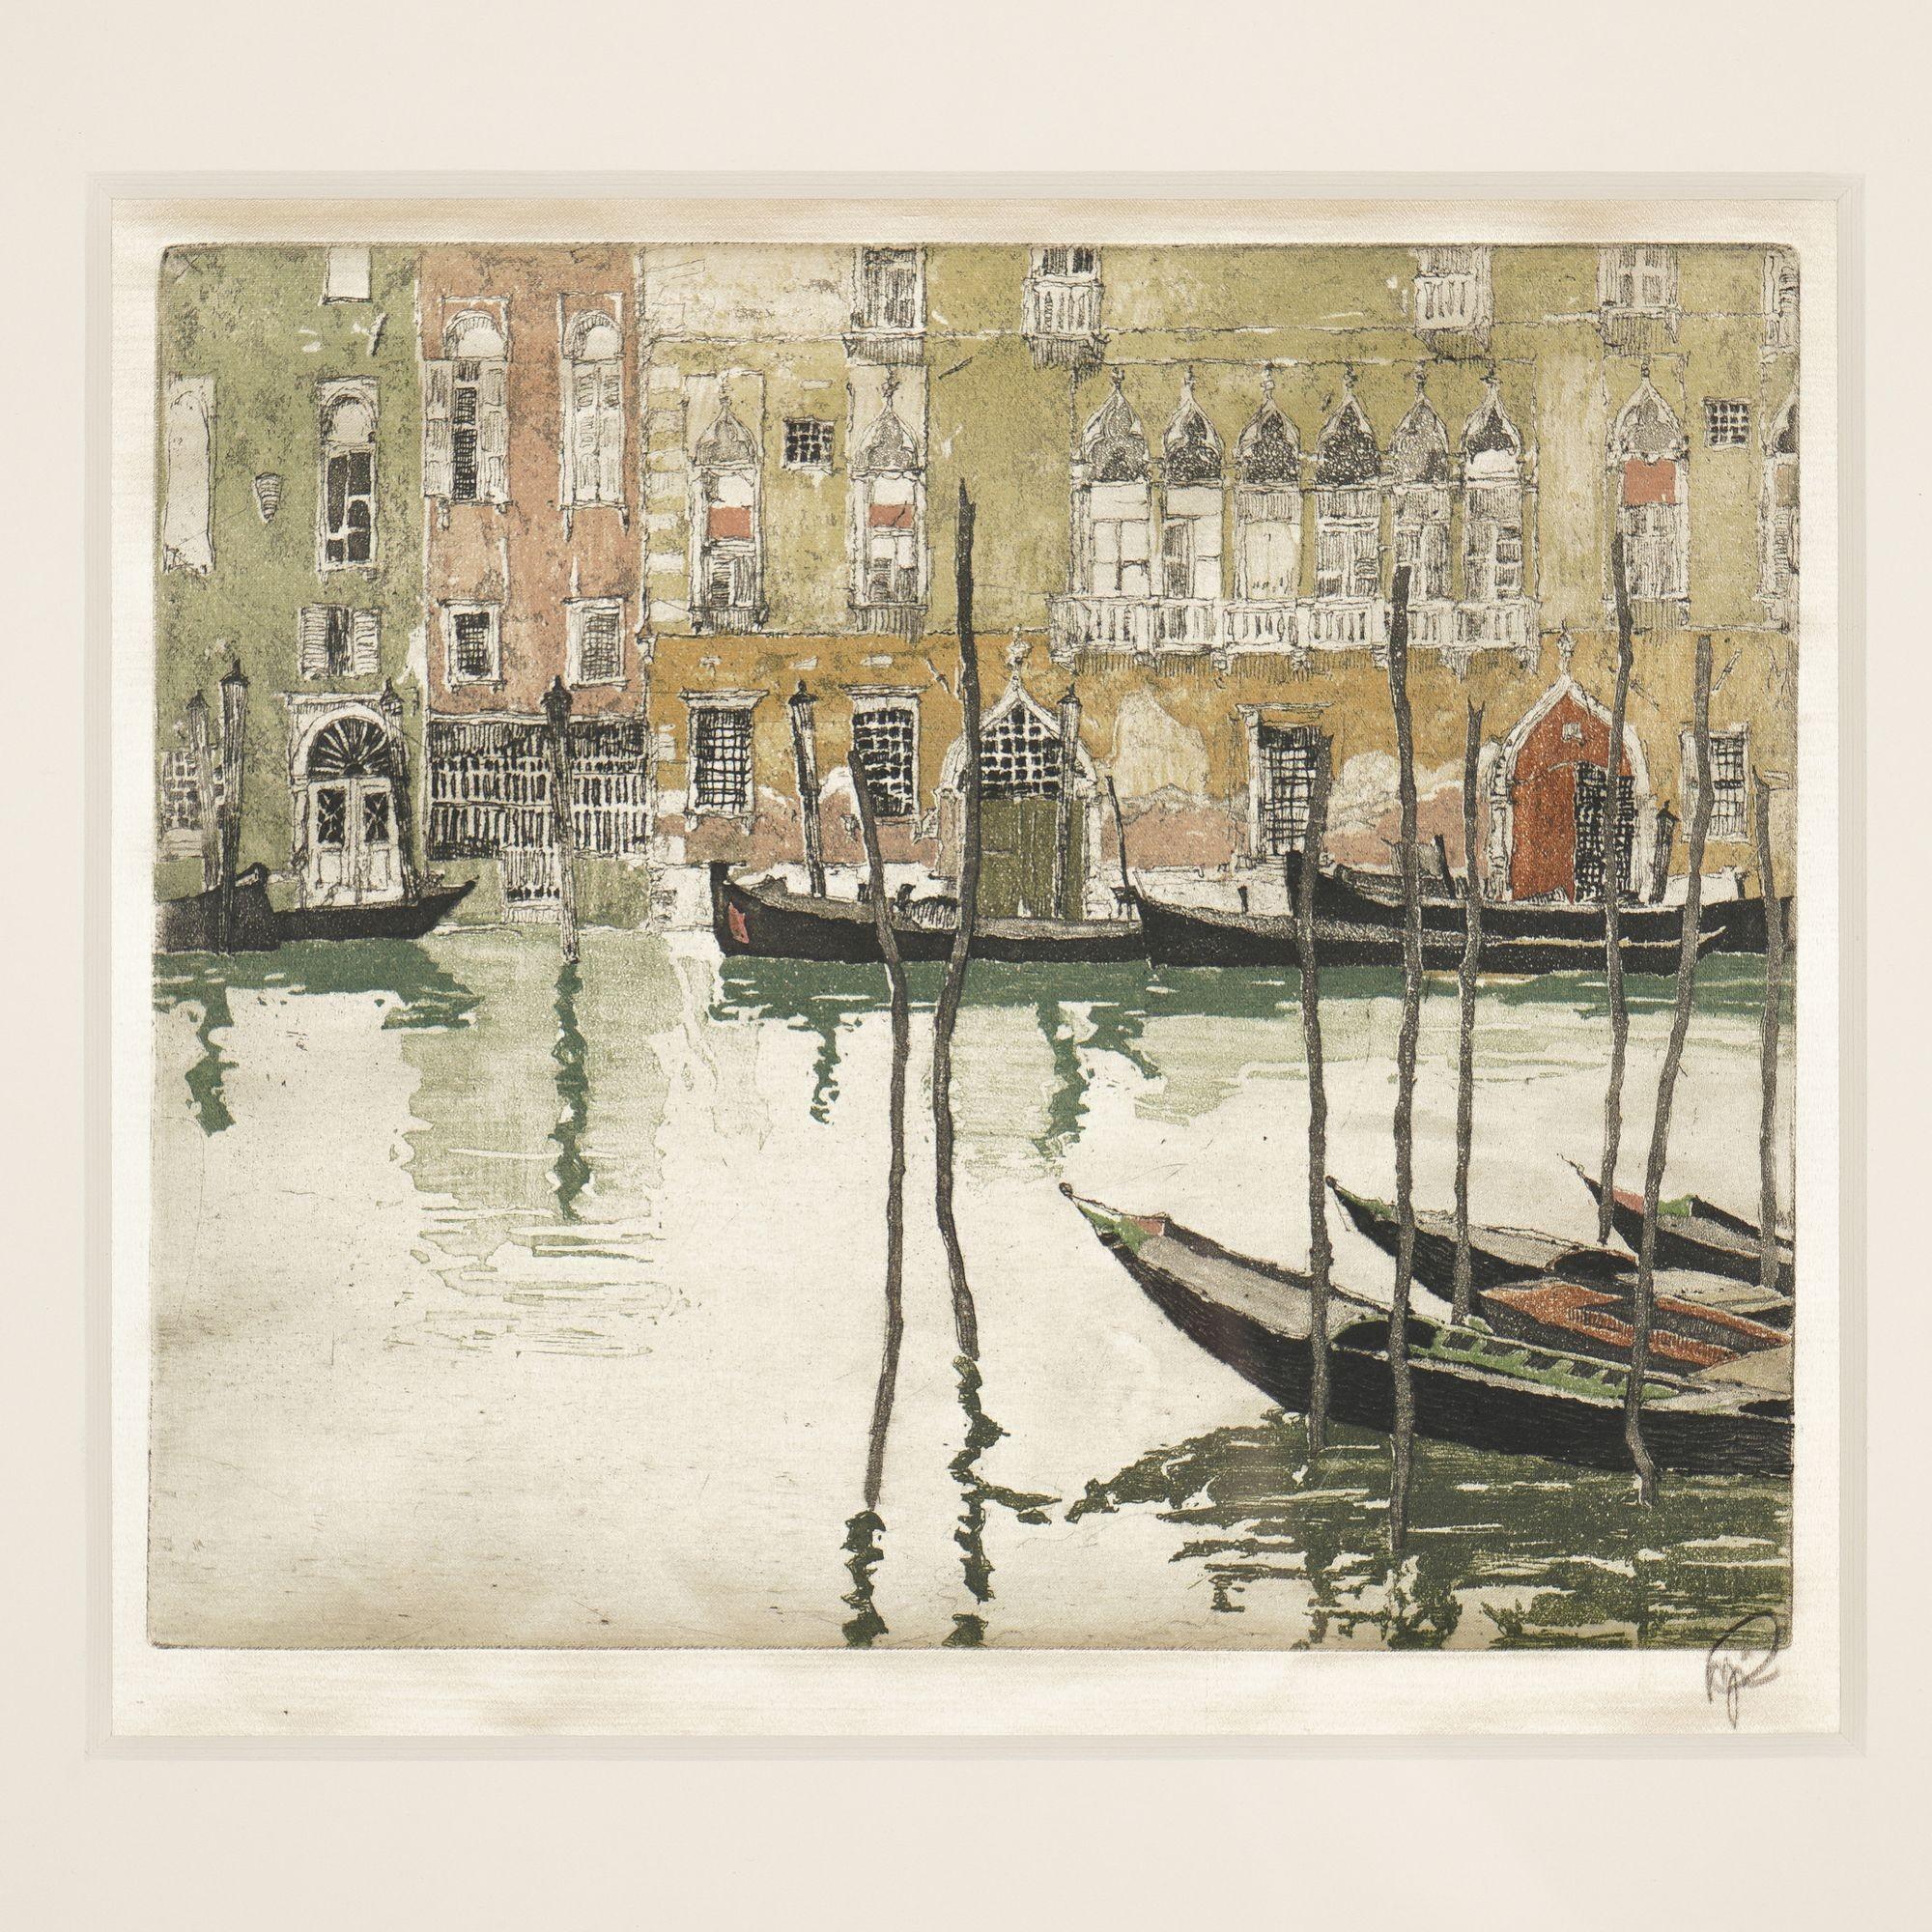 Vienna Secession School hand colored engraving printed on Japan paper and mounted on silk satin. The work centers on Venetian building facades with moored gondolas and shimmering reflections on the water in the foreground. Figura, an Austrian